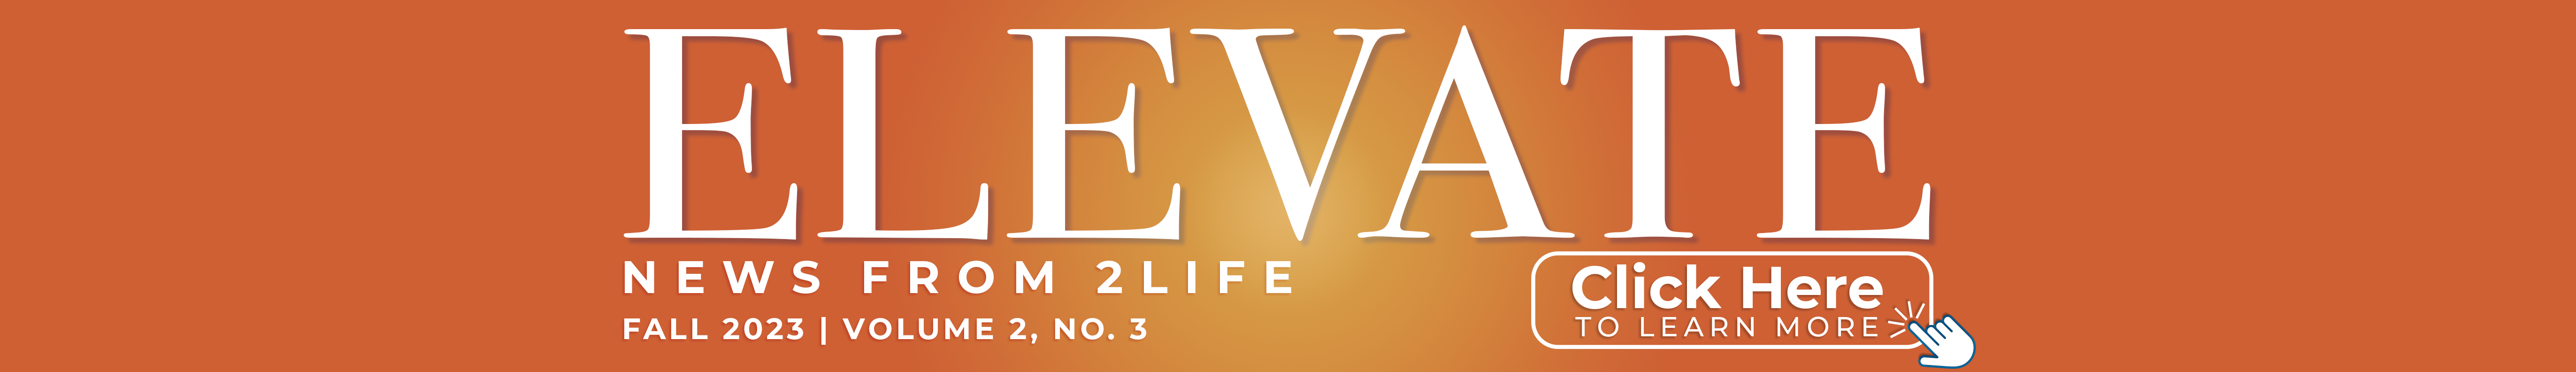 ELEVATE | News From 2Life | Fall 2023